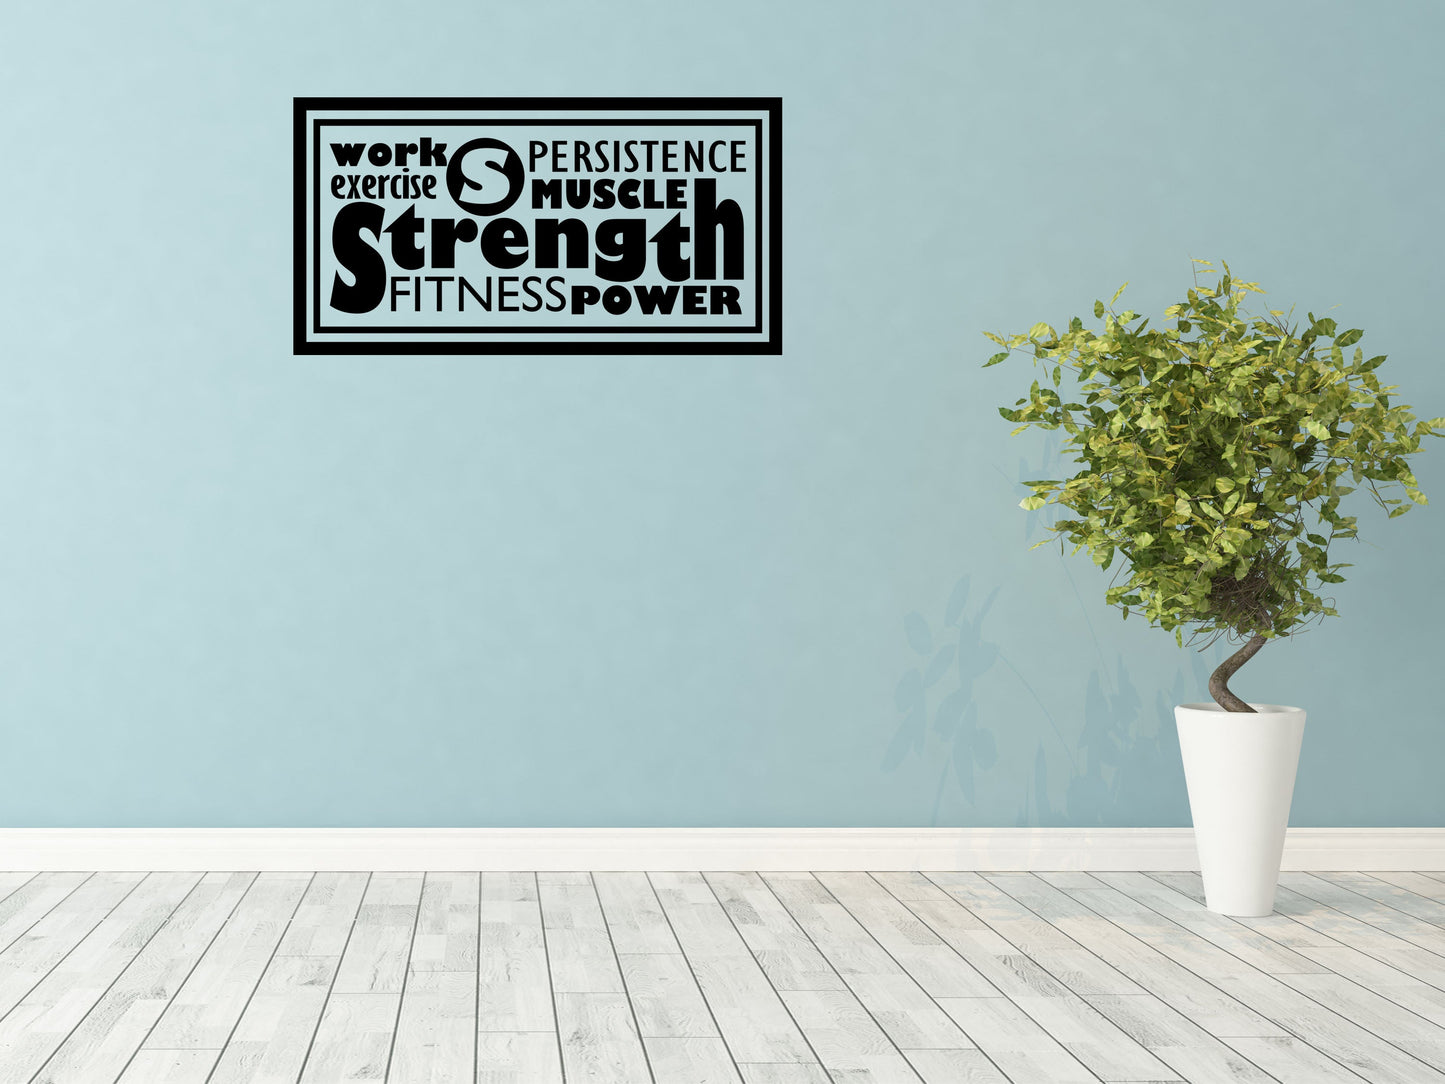 Work Exercise Office Wall Sticker - Inspirational Wall Decals Done 